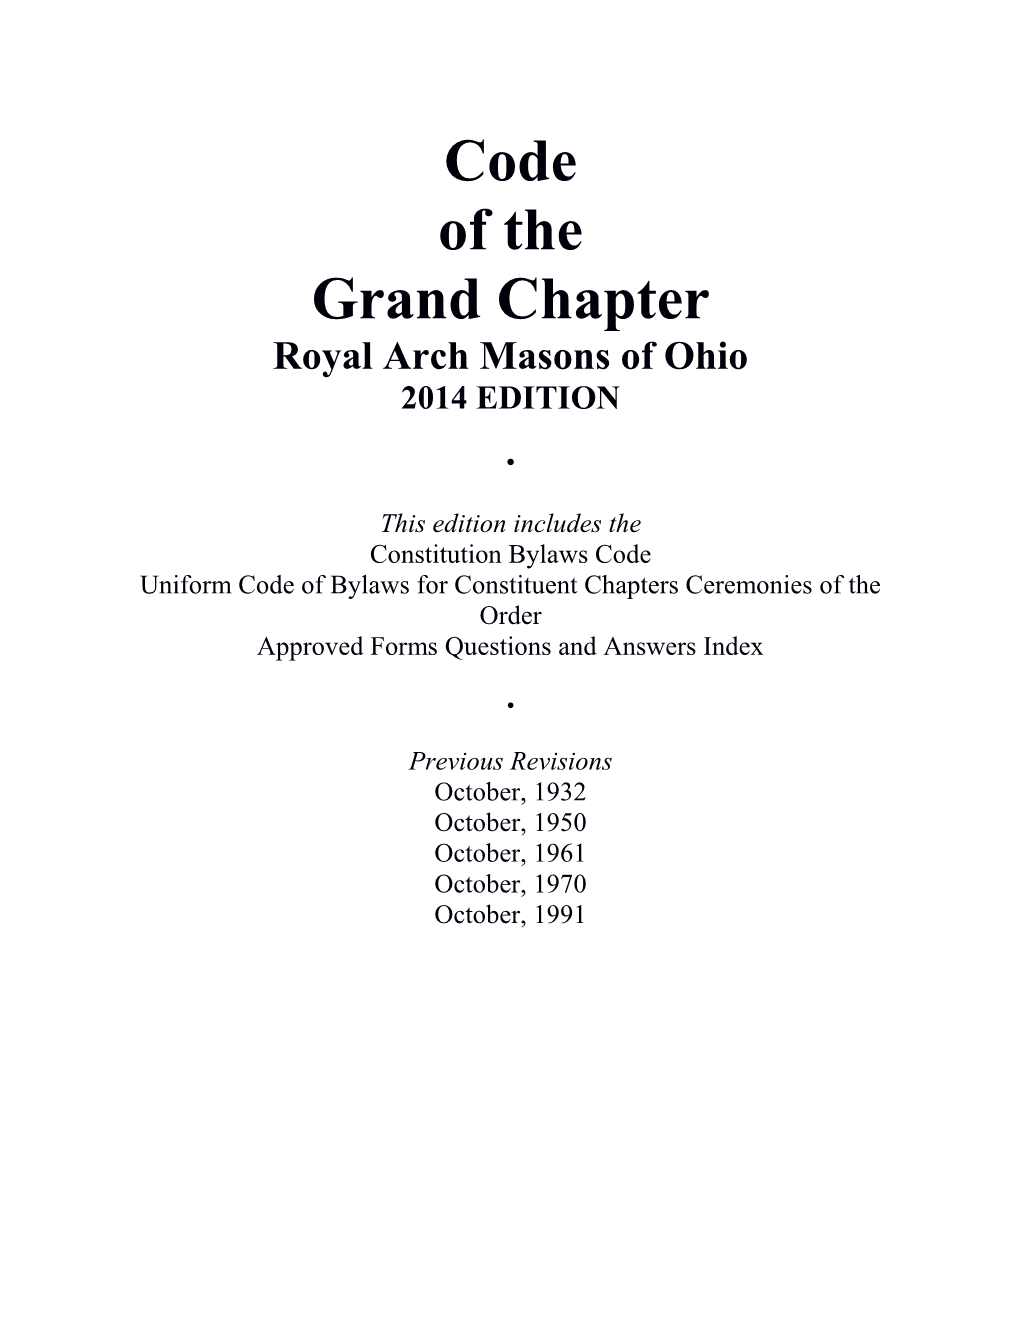 Code of the Grand Chapter Royal Arch Masons of Ohio 2014 EDITION